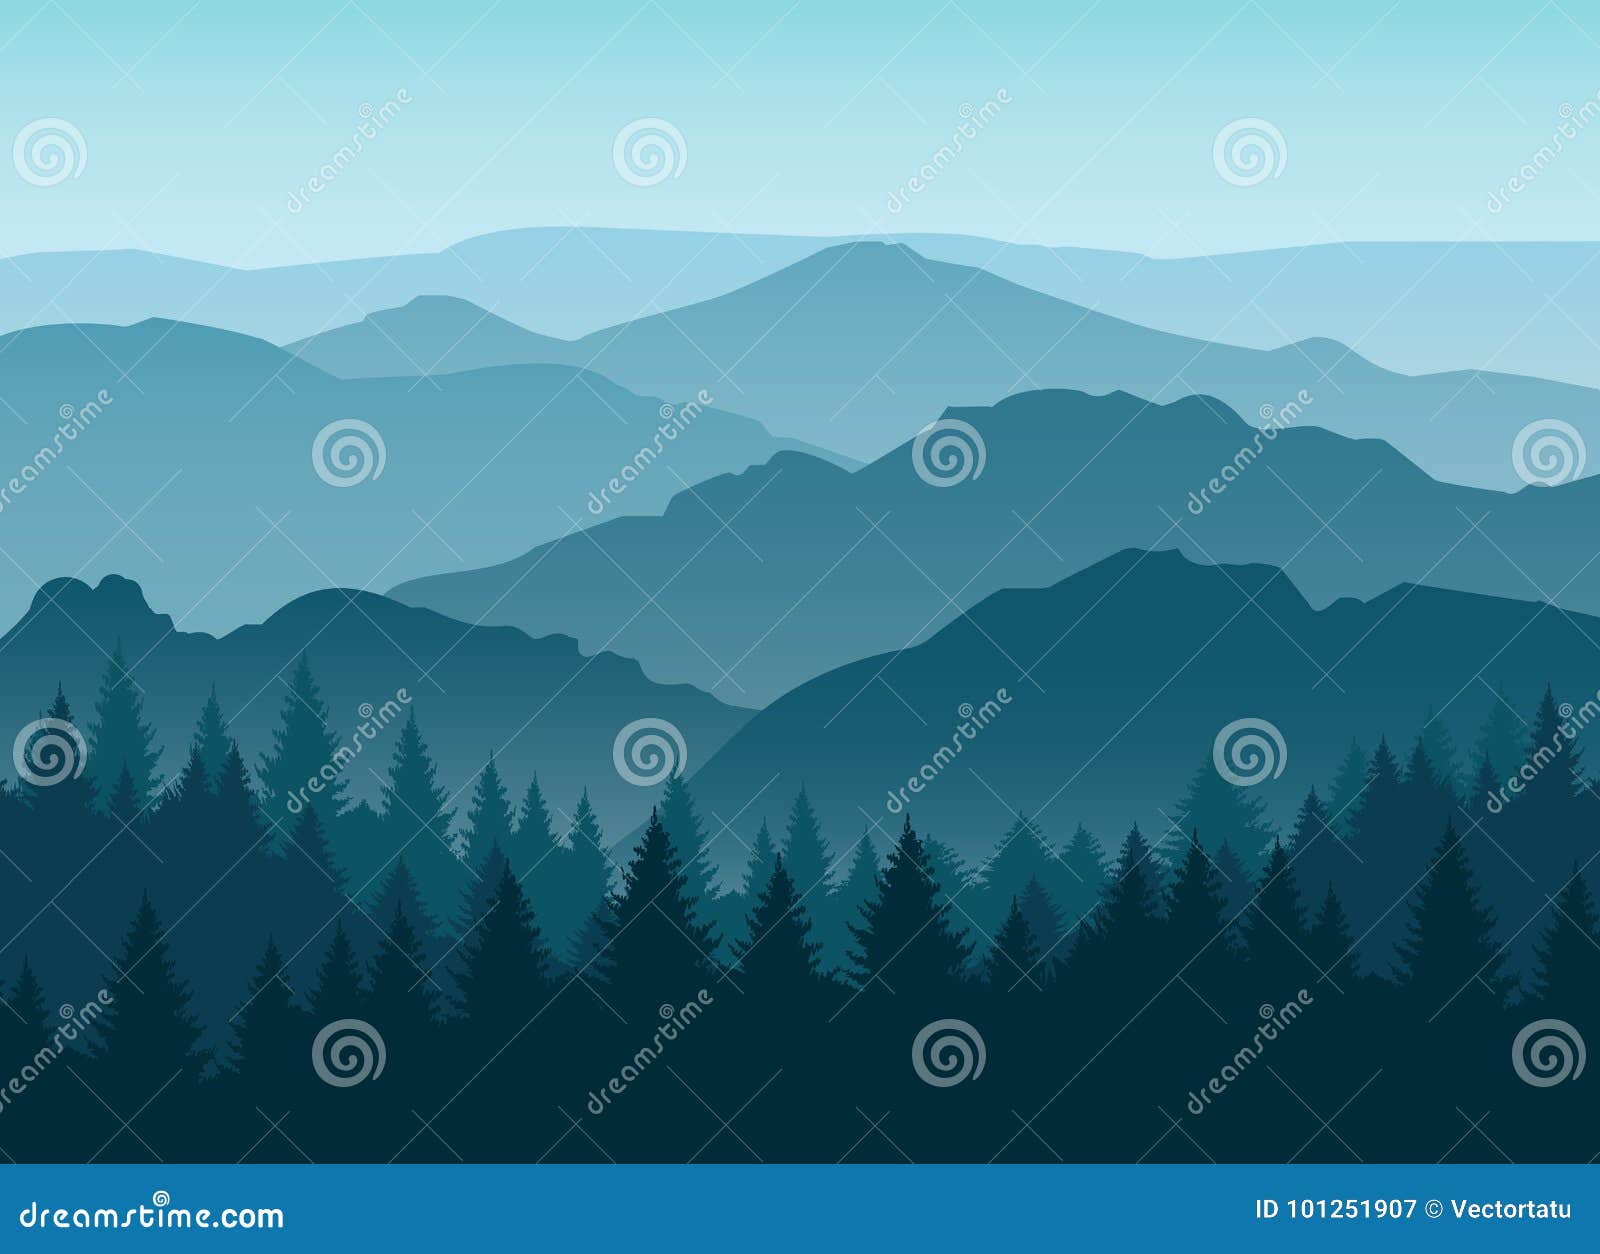 misty blue mountain silhouettes background